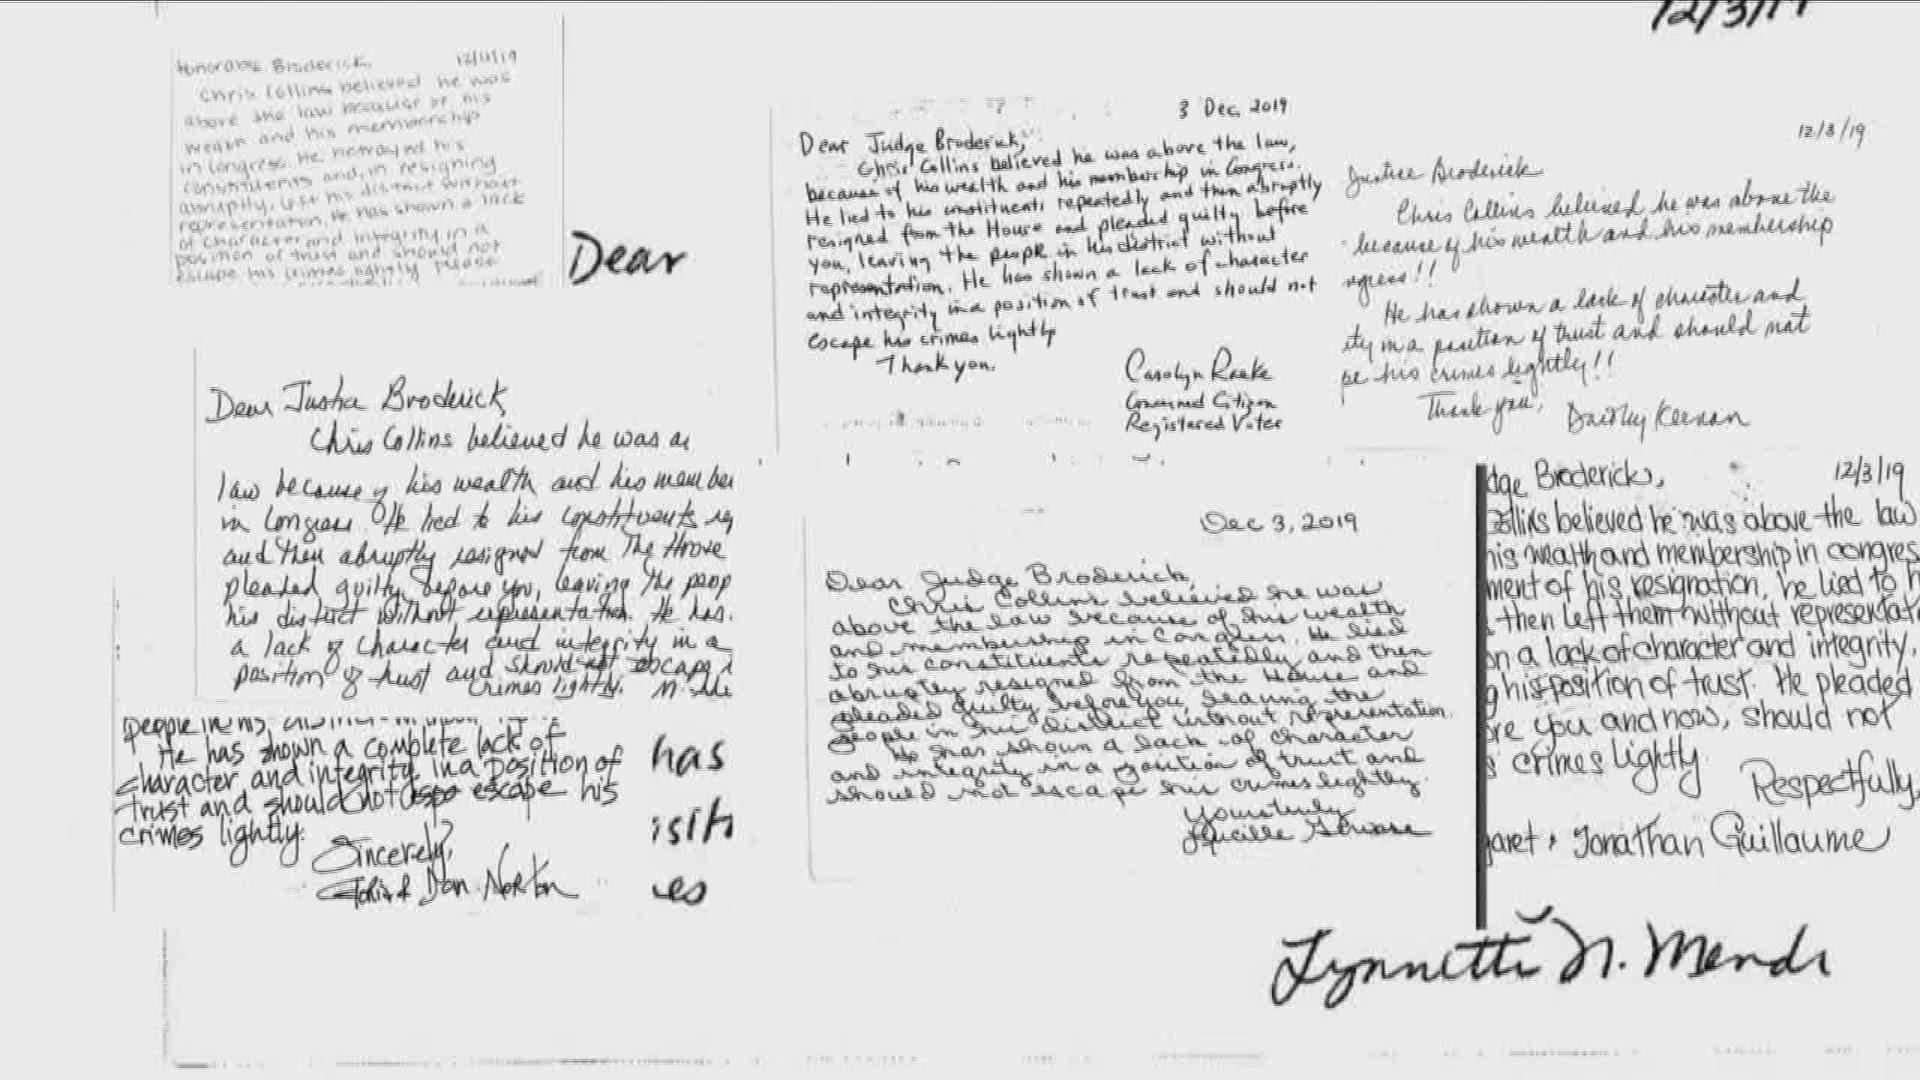 several , handwritten on postcards, are in fact identical in their wording, indicating an organized effort to convice the judge to throw book at Collins